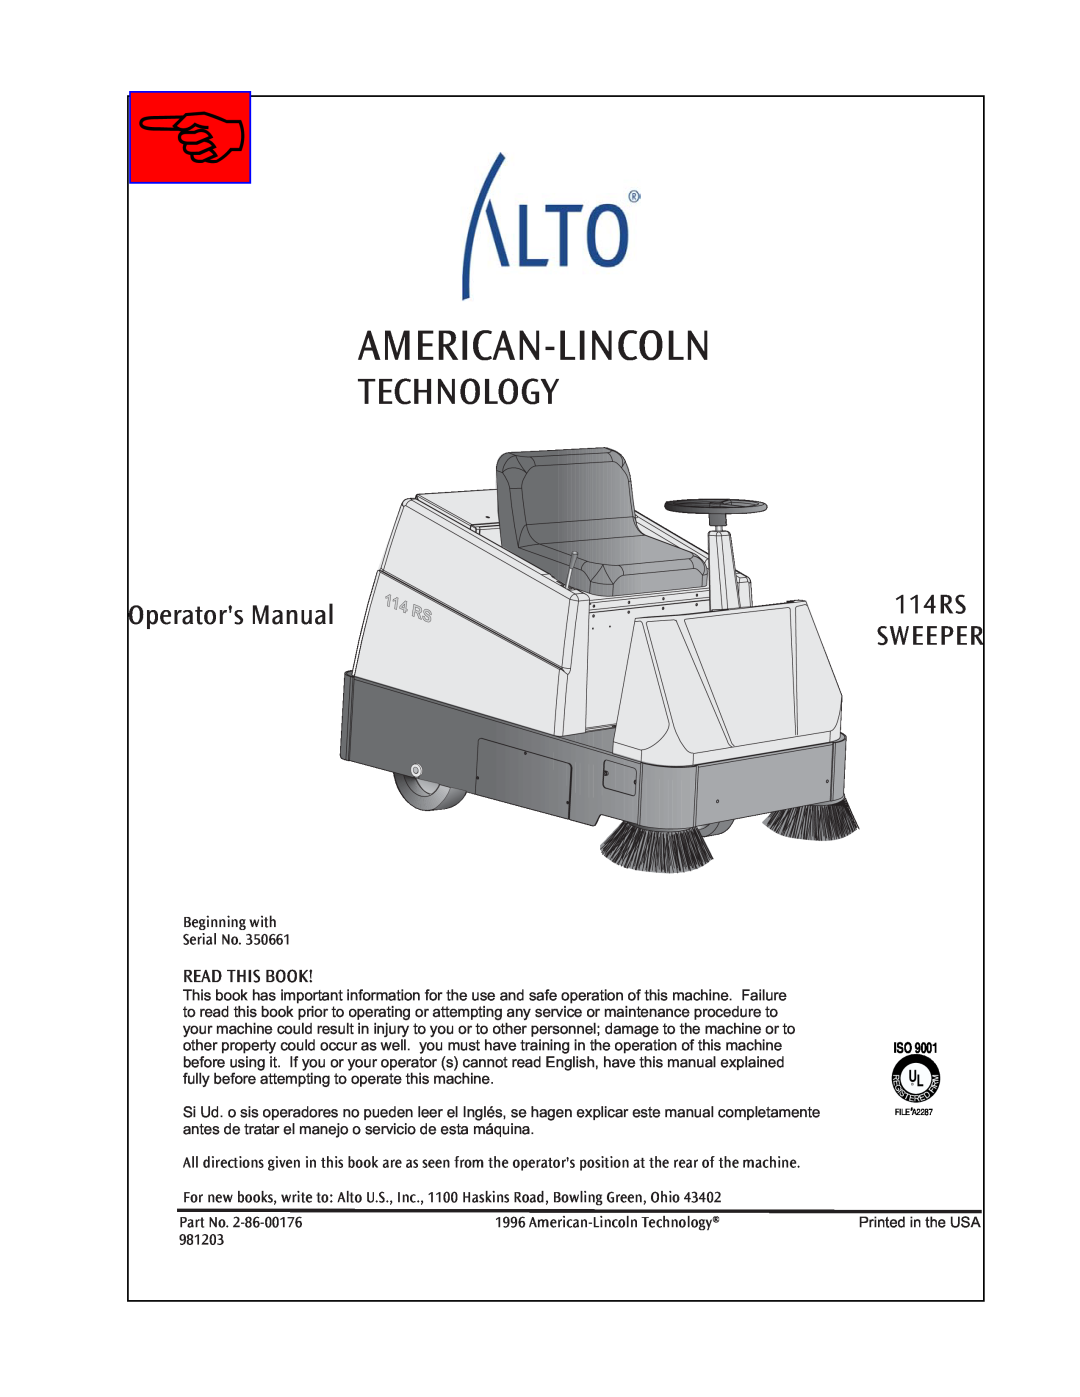 Nilfisk-ALTO 114RS SWEEPER manual American-Lincoln, Technology, Operators Manual, Sweeper, Read This Book, 981203 